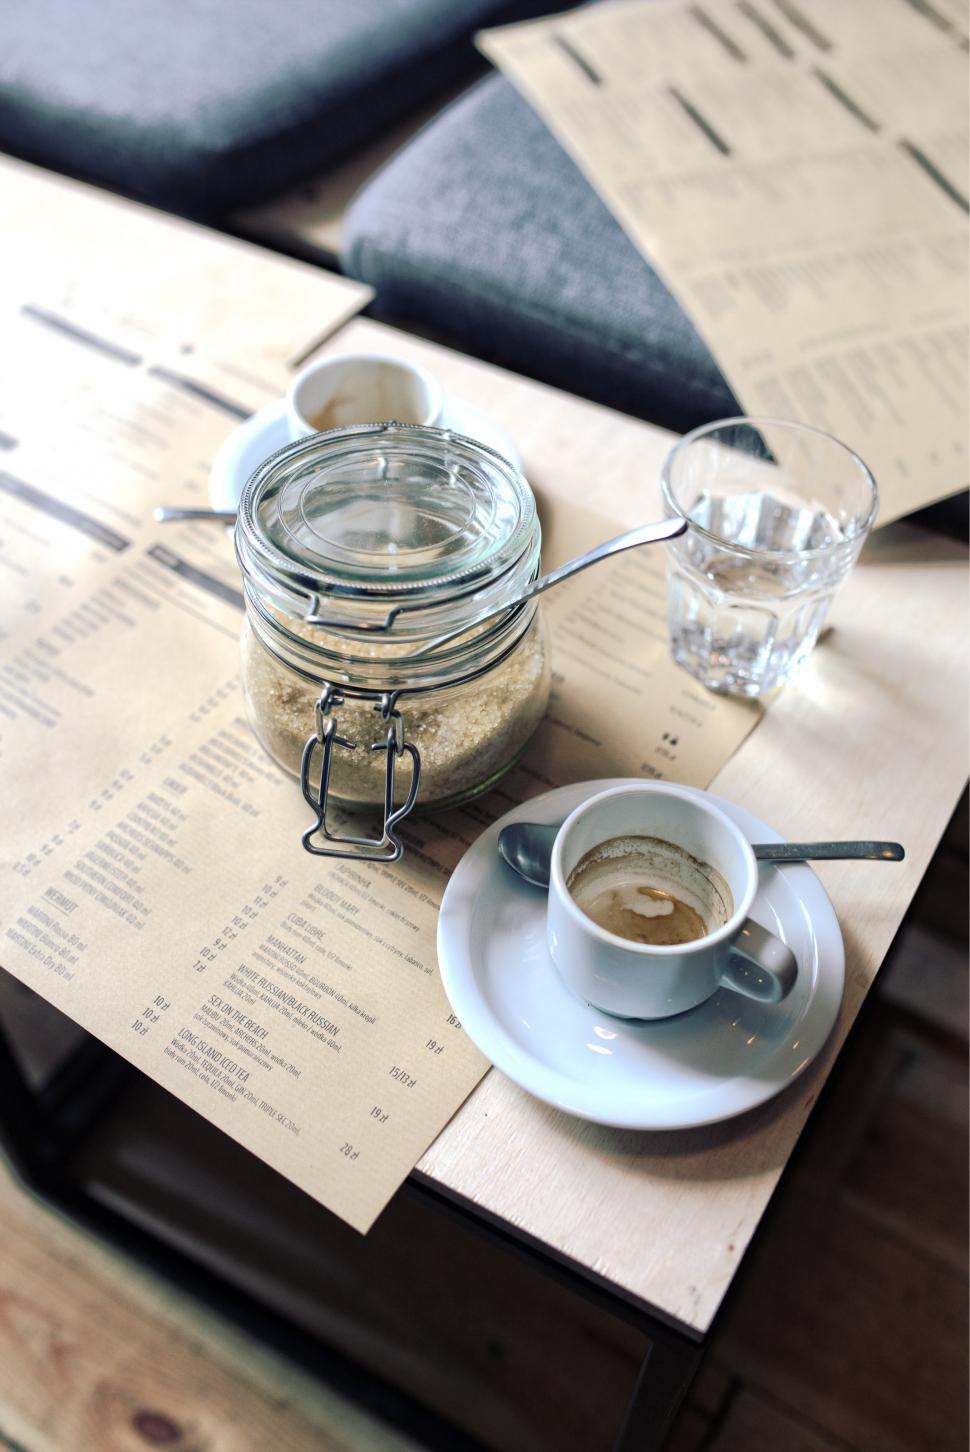 Free Image of Coffee Cup and Jar on Table 